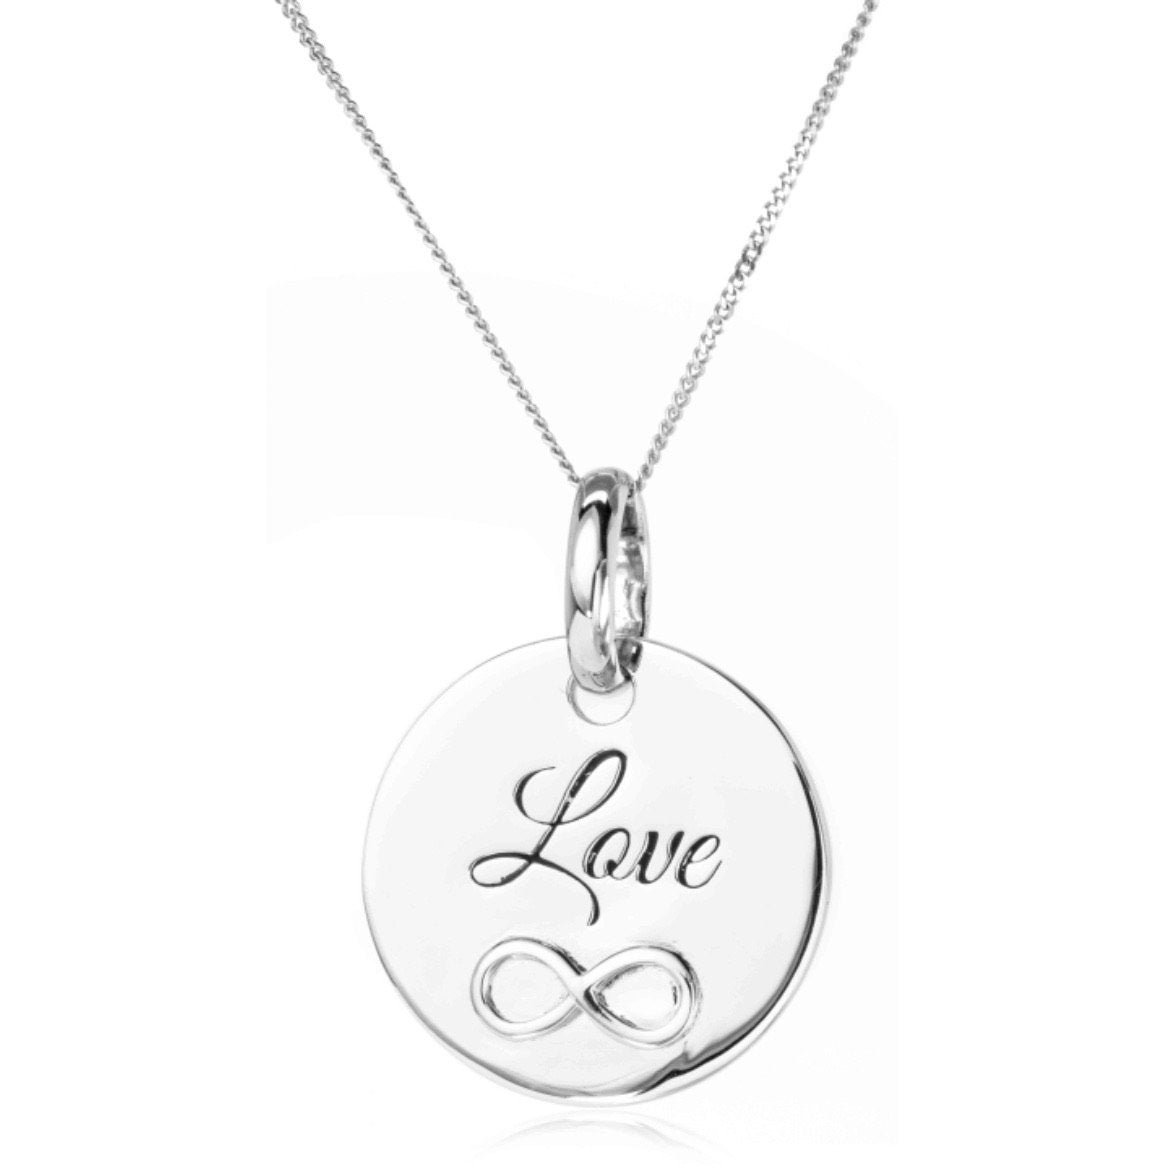 Love Infinity 925 Sterling Silver Pendant 20 mm in Diameter with 42 cm Silver Chain | Perfect for Symbolizing Endless Love and Affection - RubyJade